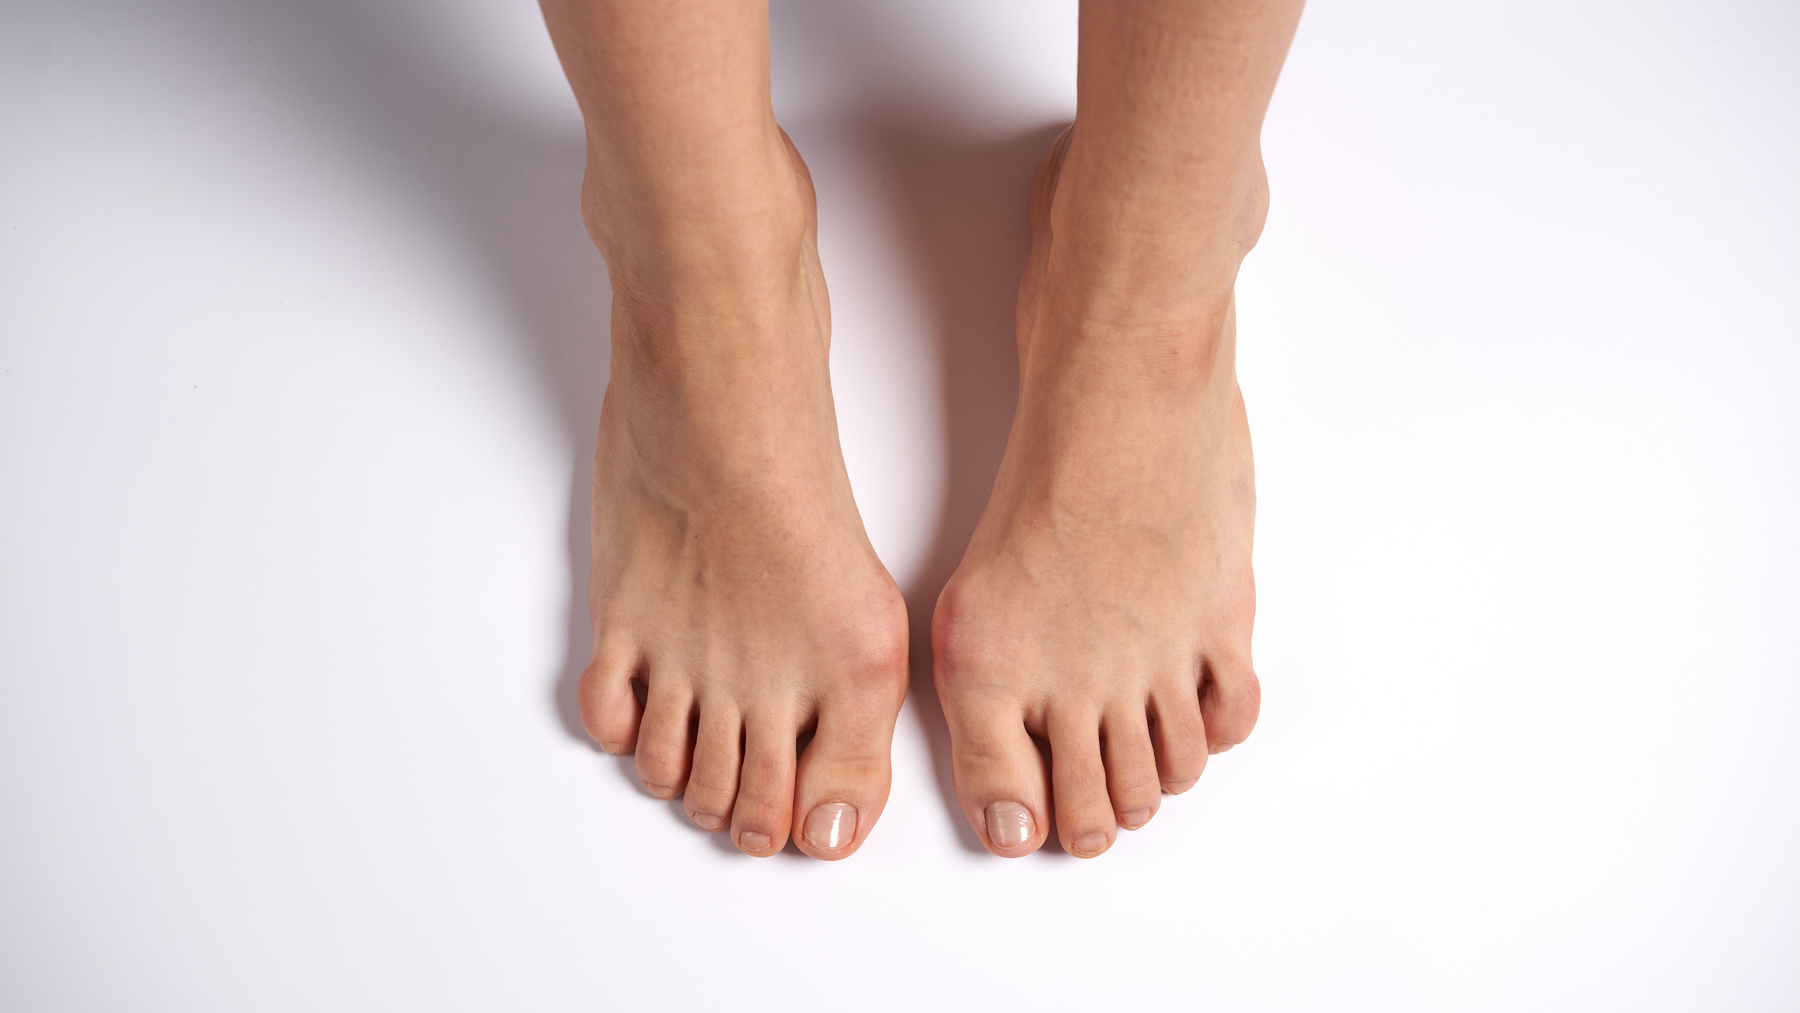 Close up of bare feet with visible bunions